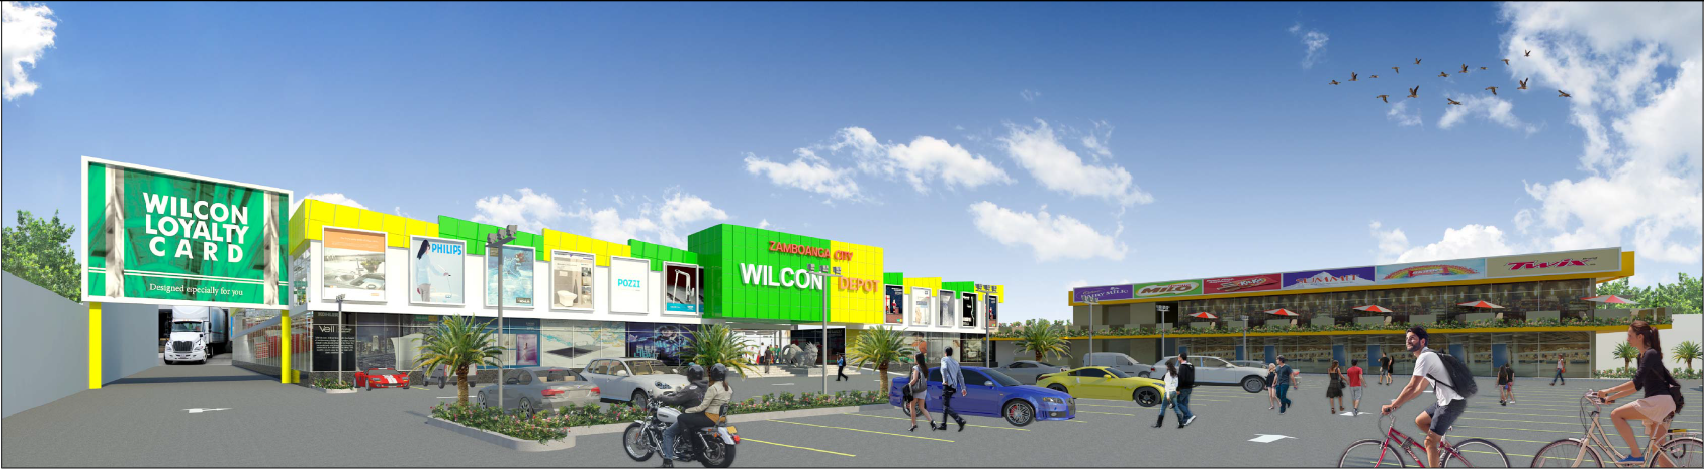 Wilcon Depot Project